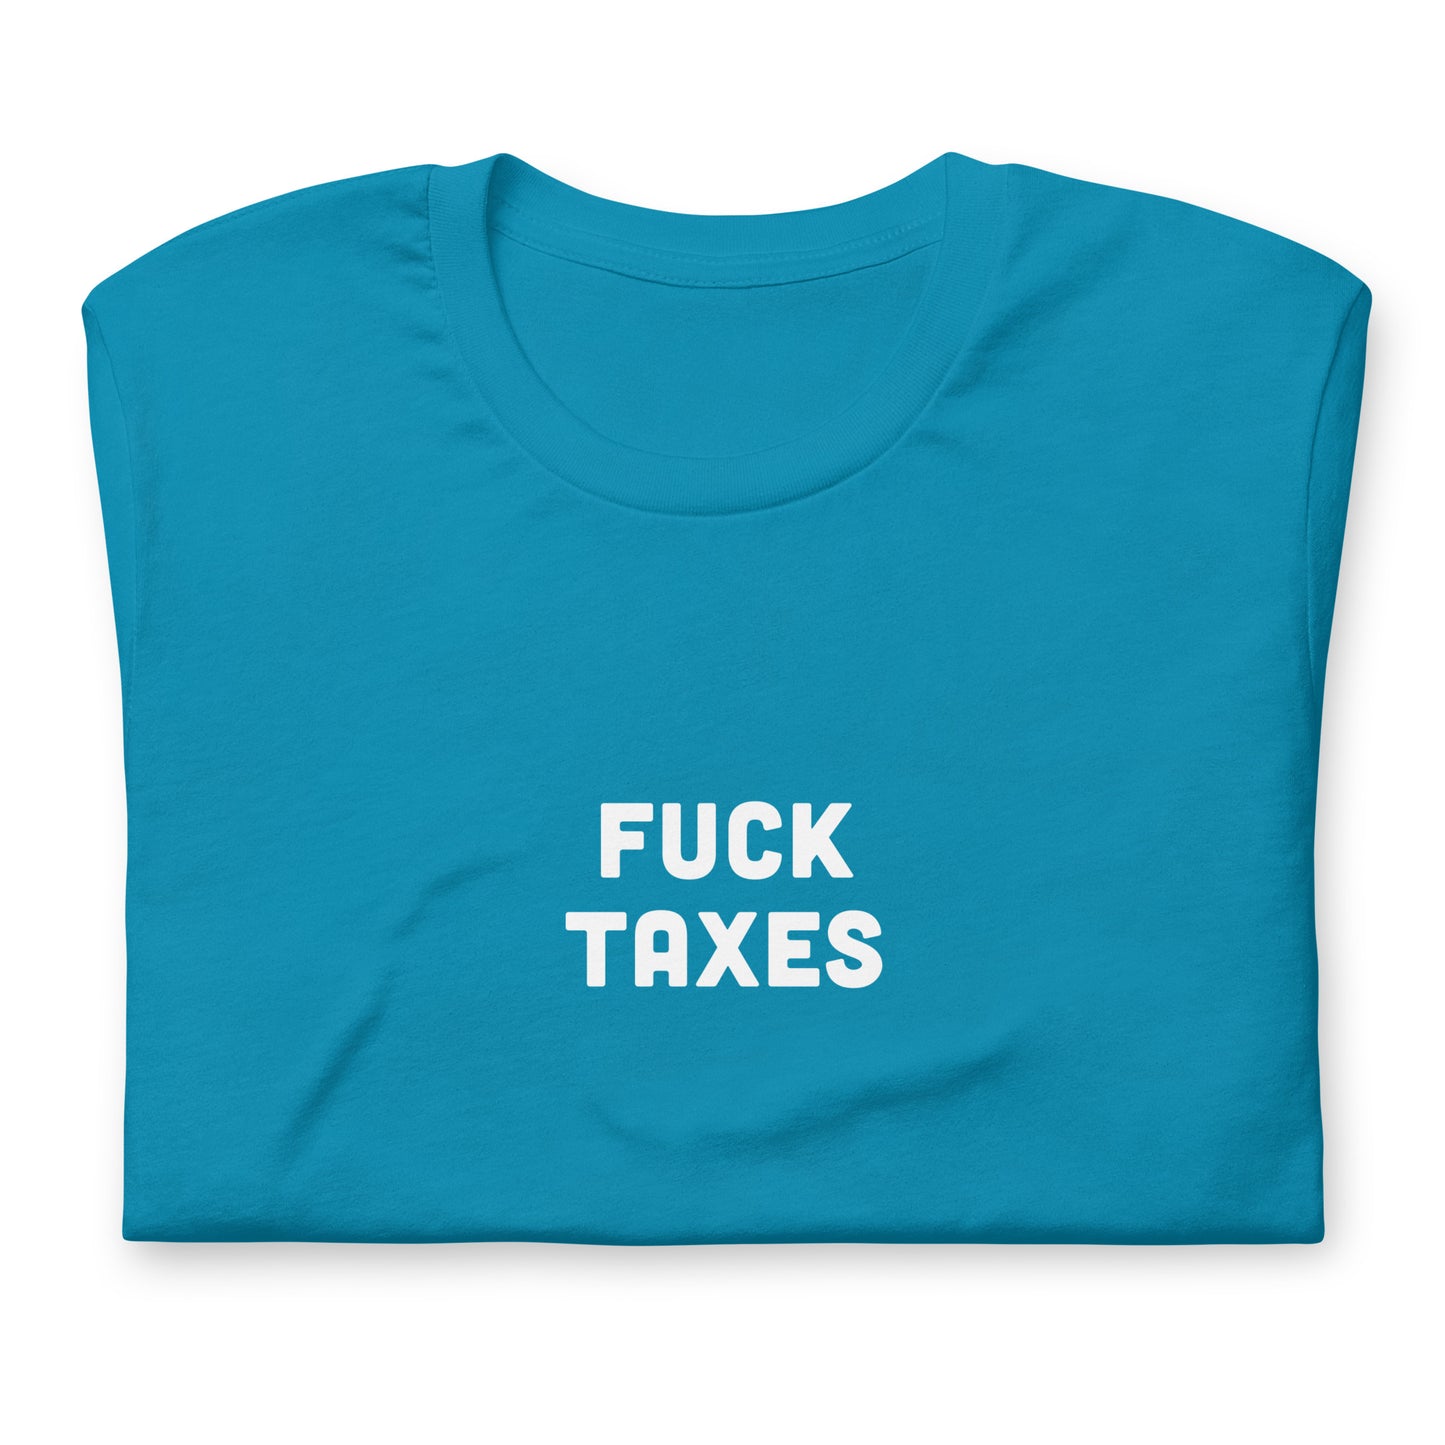 Fuck Taxes T-Shirt Size M Color Navy